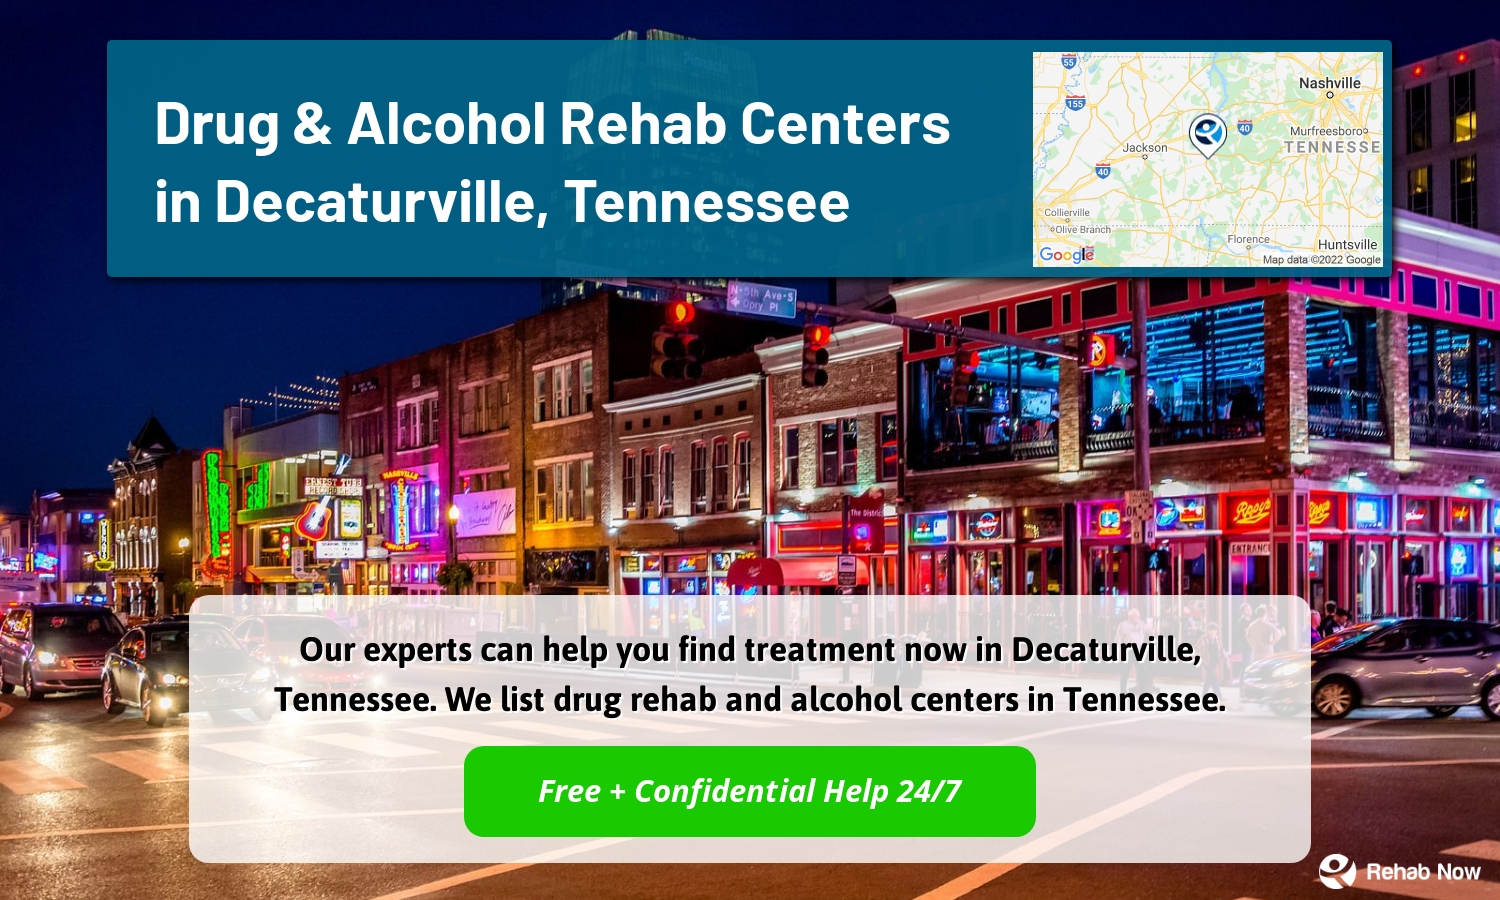 Our experts can help you find treatment now in Decaturville, Tennessee. We list drug rehab and alcohol centers in Tennessee.